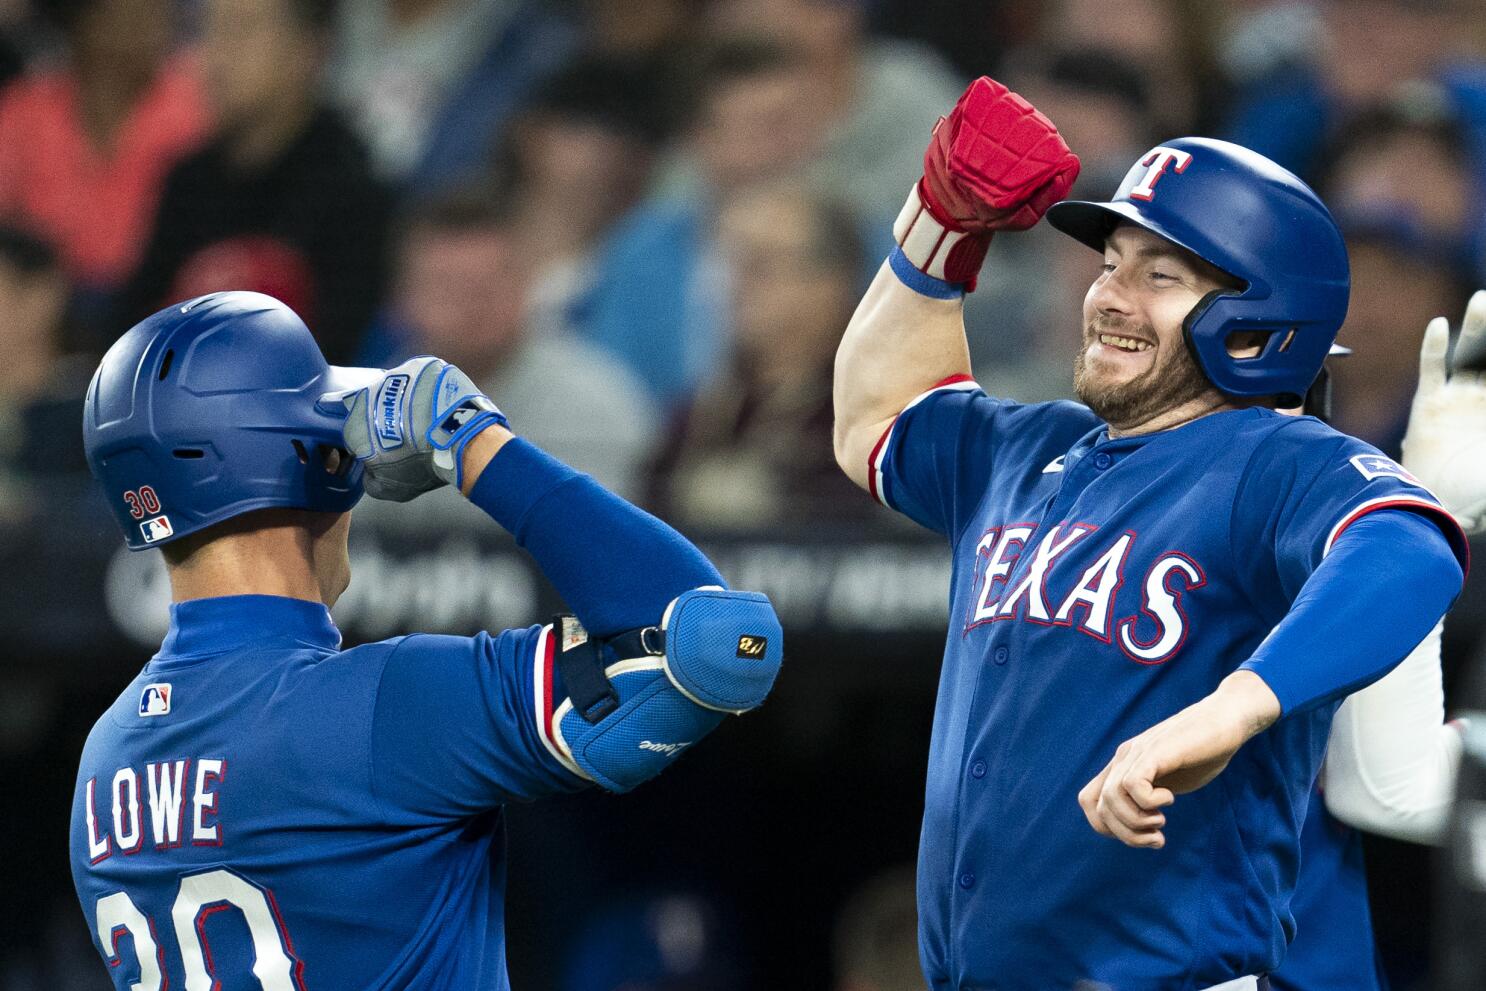 Montgomery sharp, Rangers hit 3 HRs to win fifth straight, beat